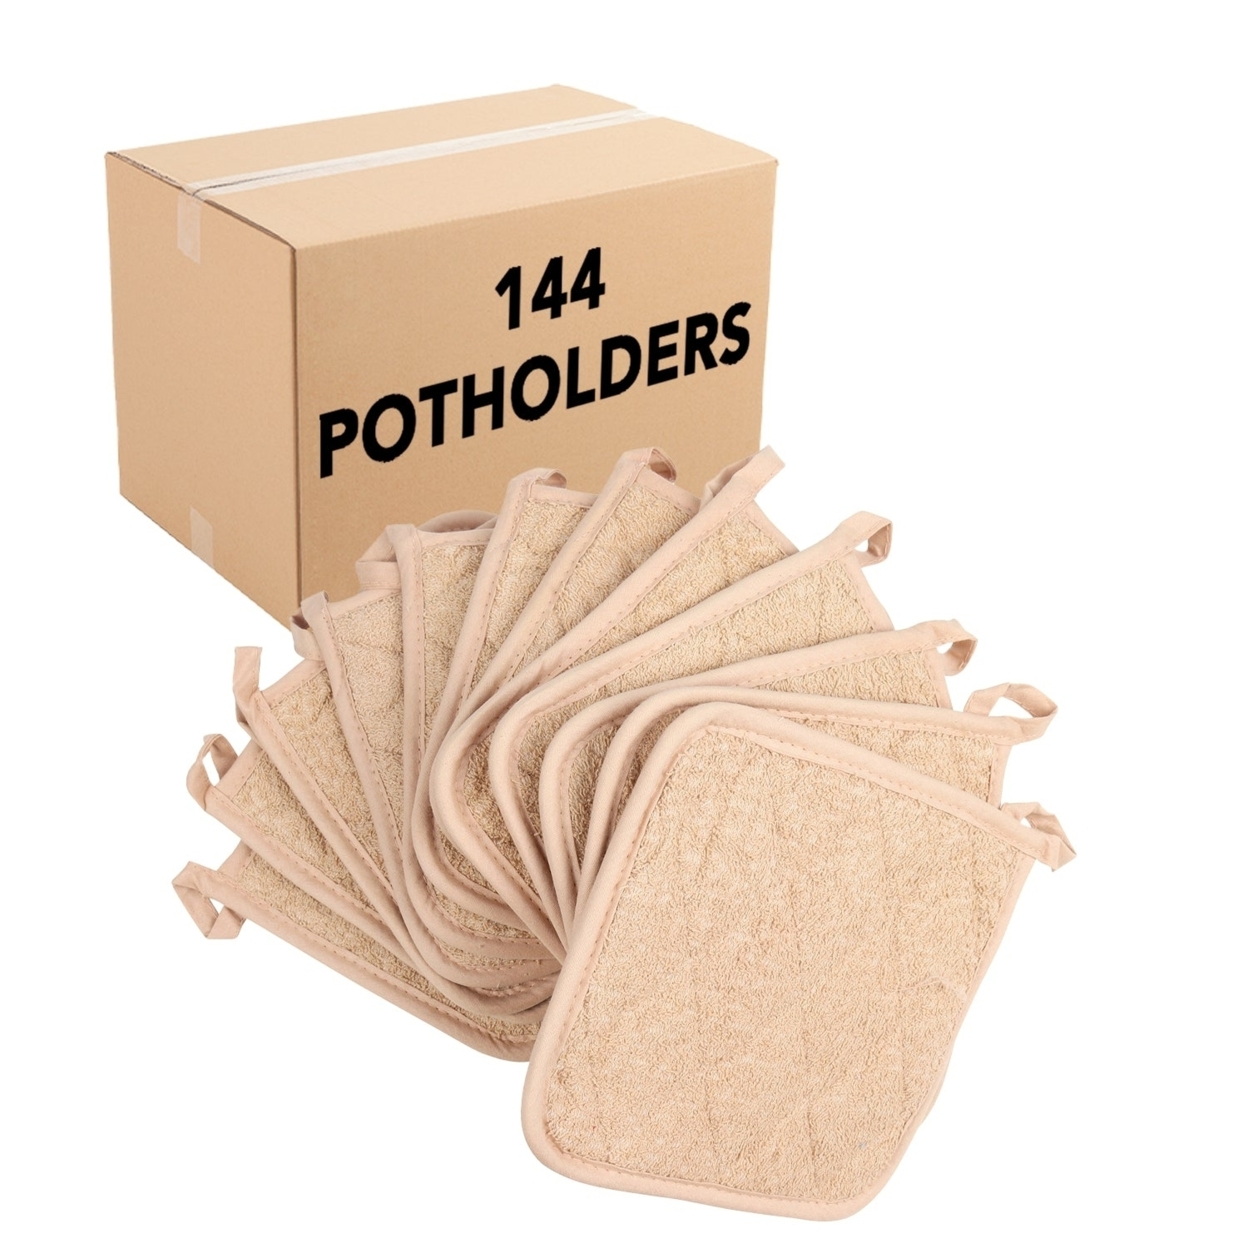 Pot Holder 12-Pack, Cotton Terry, Looped, 7x7 in., Six Colors, Buy a 12-Pack or a Case of 144. - Tan, Case of 144